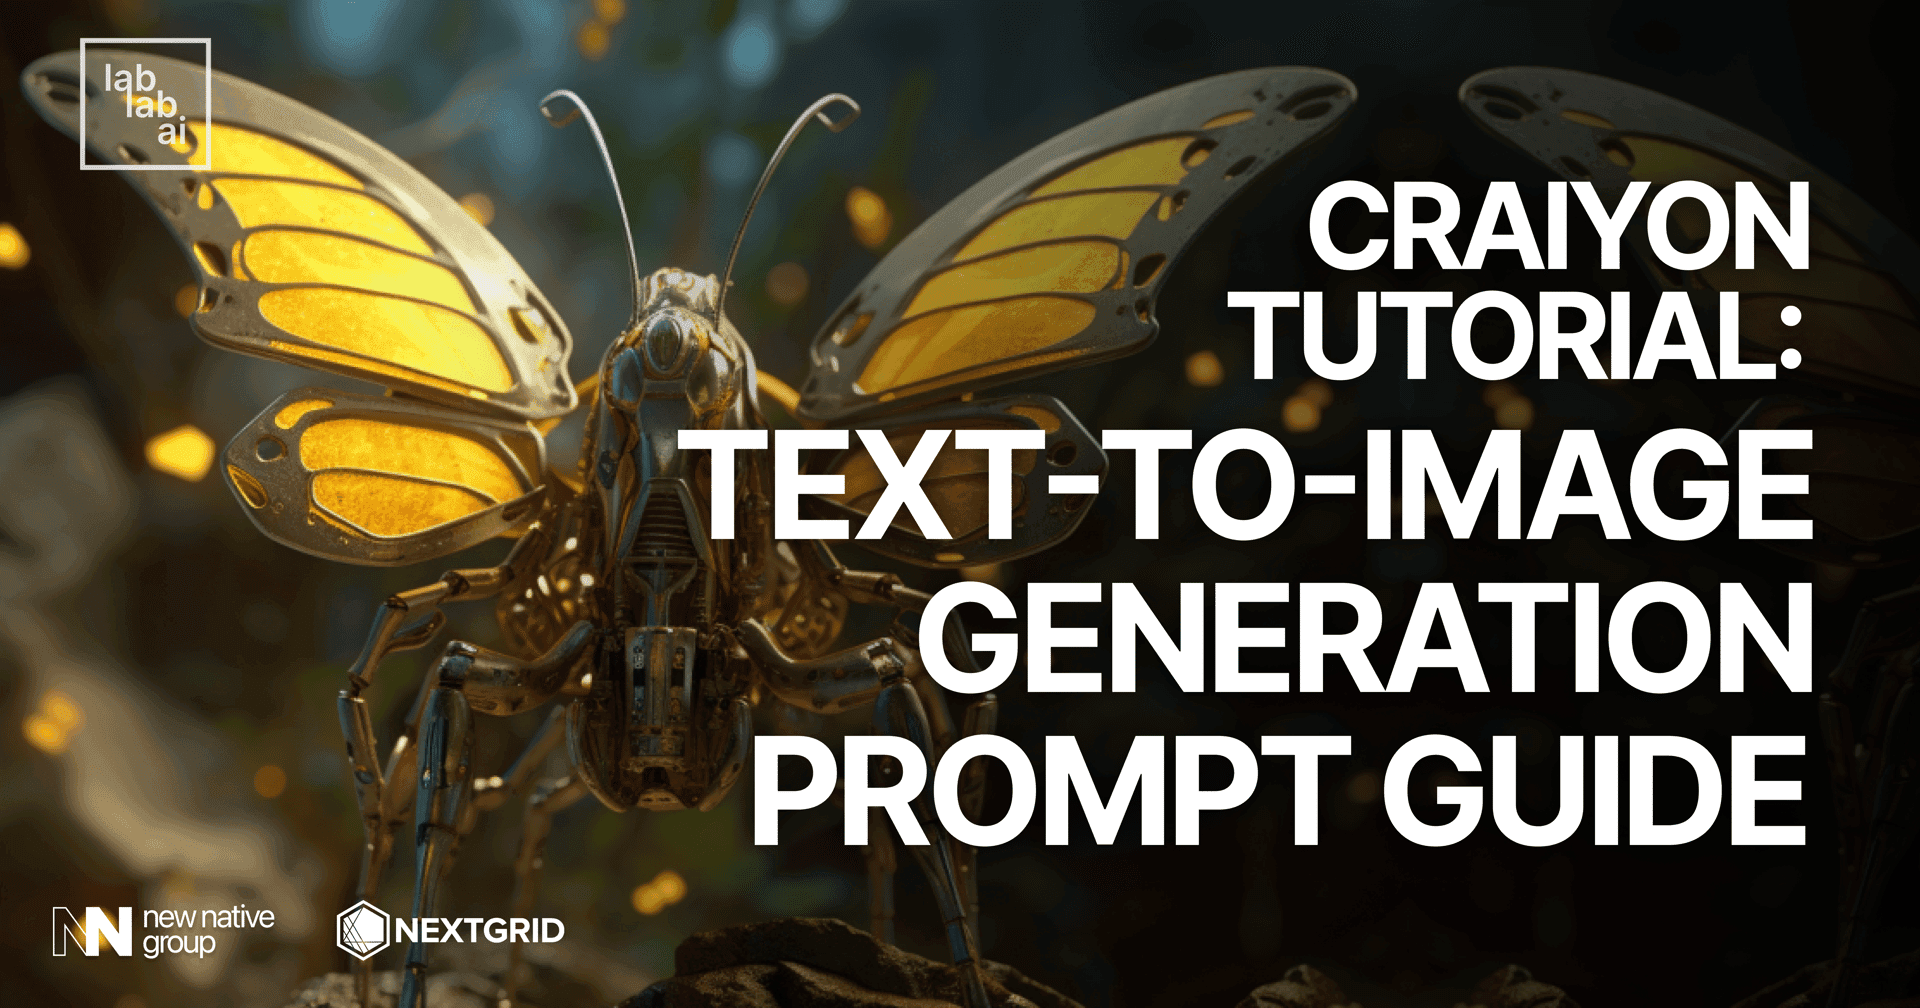 Craiyon tutorial: text-to-image generation prompt guide